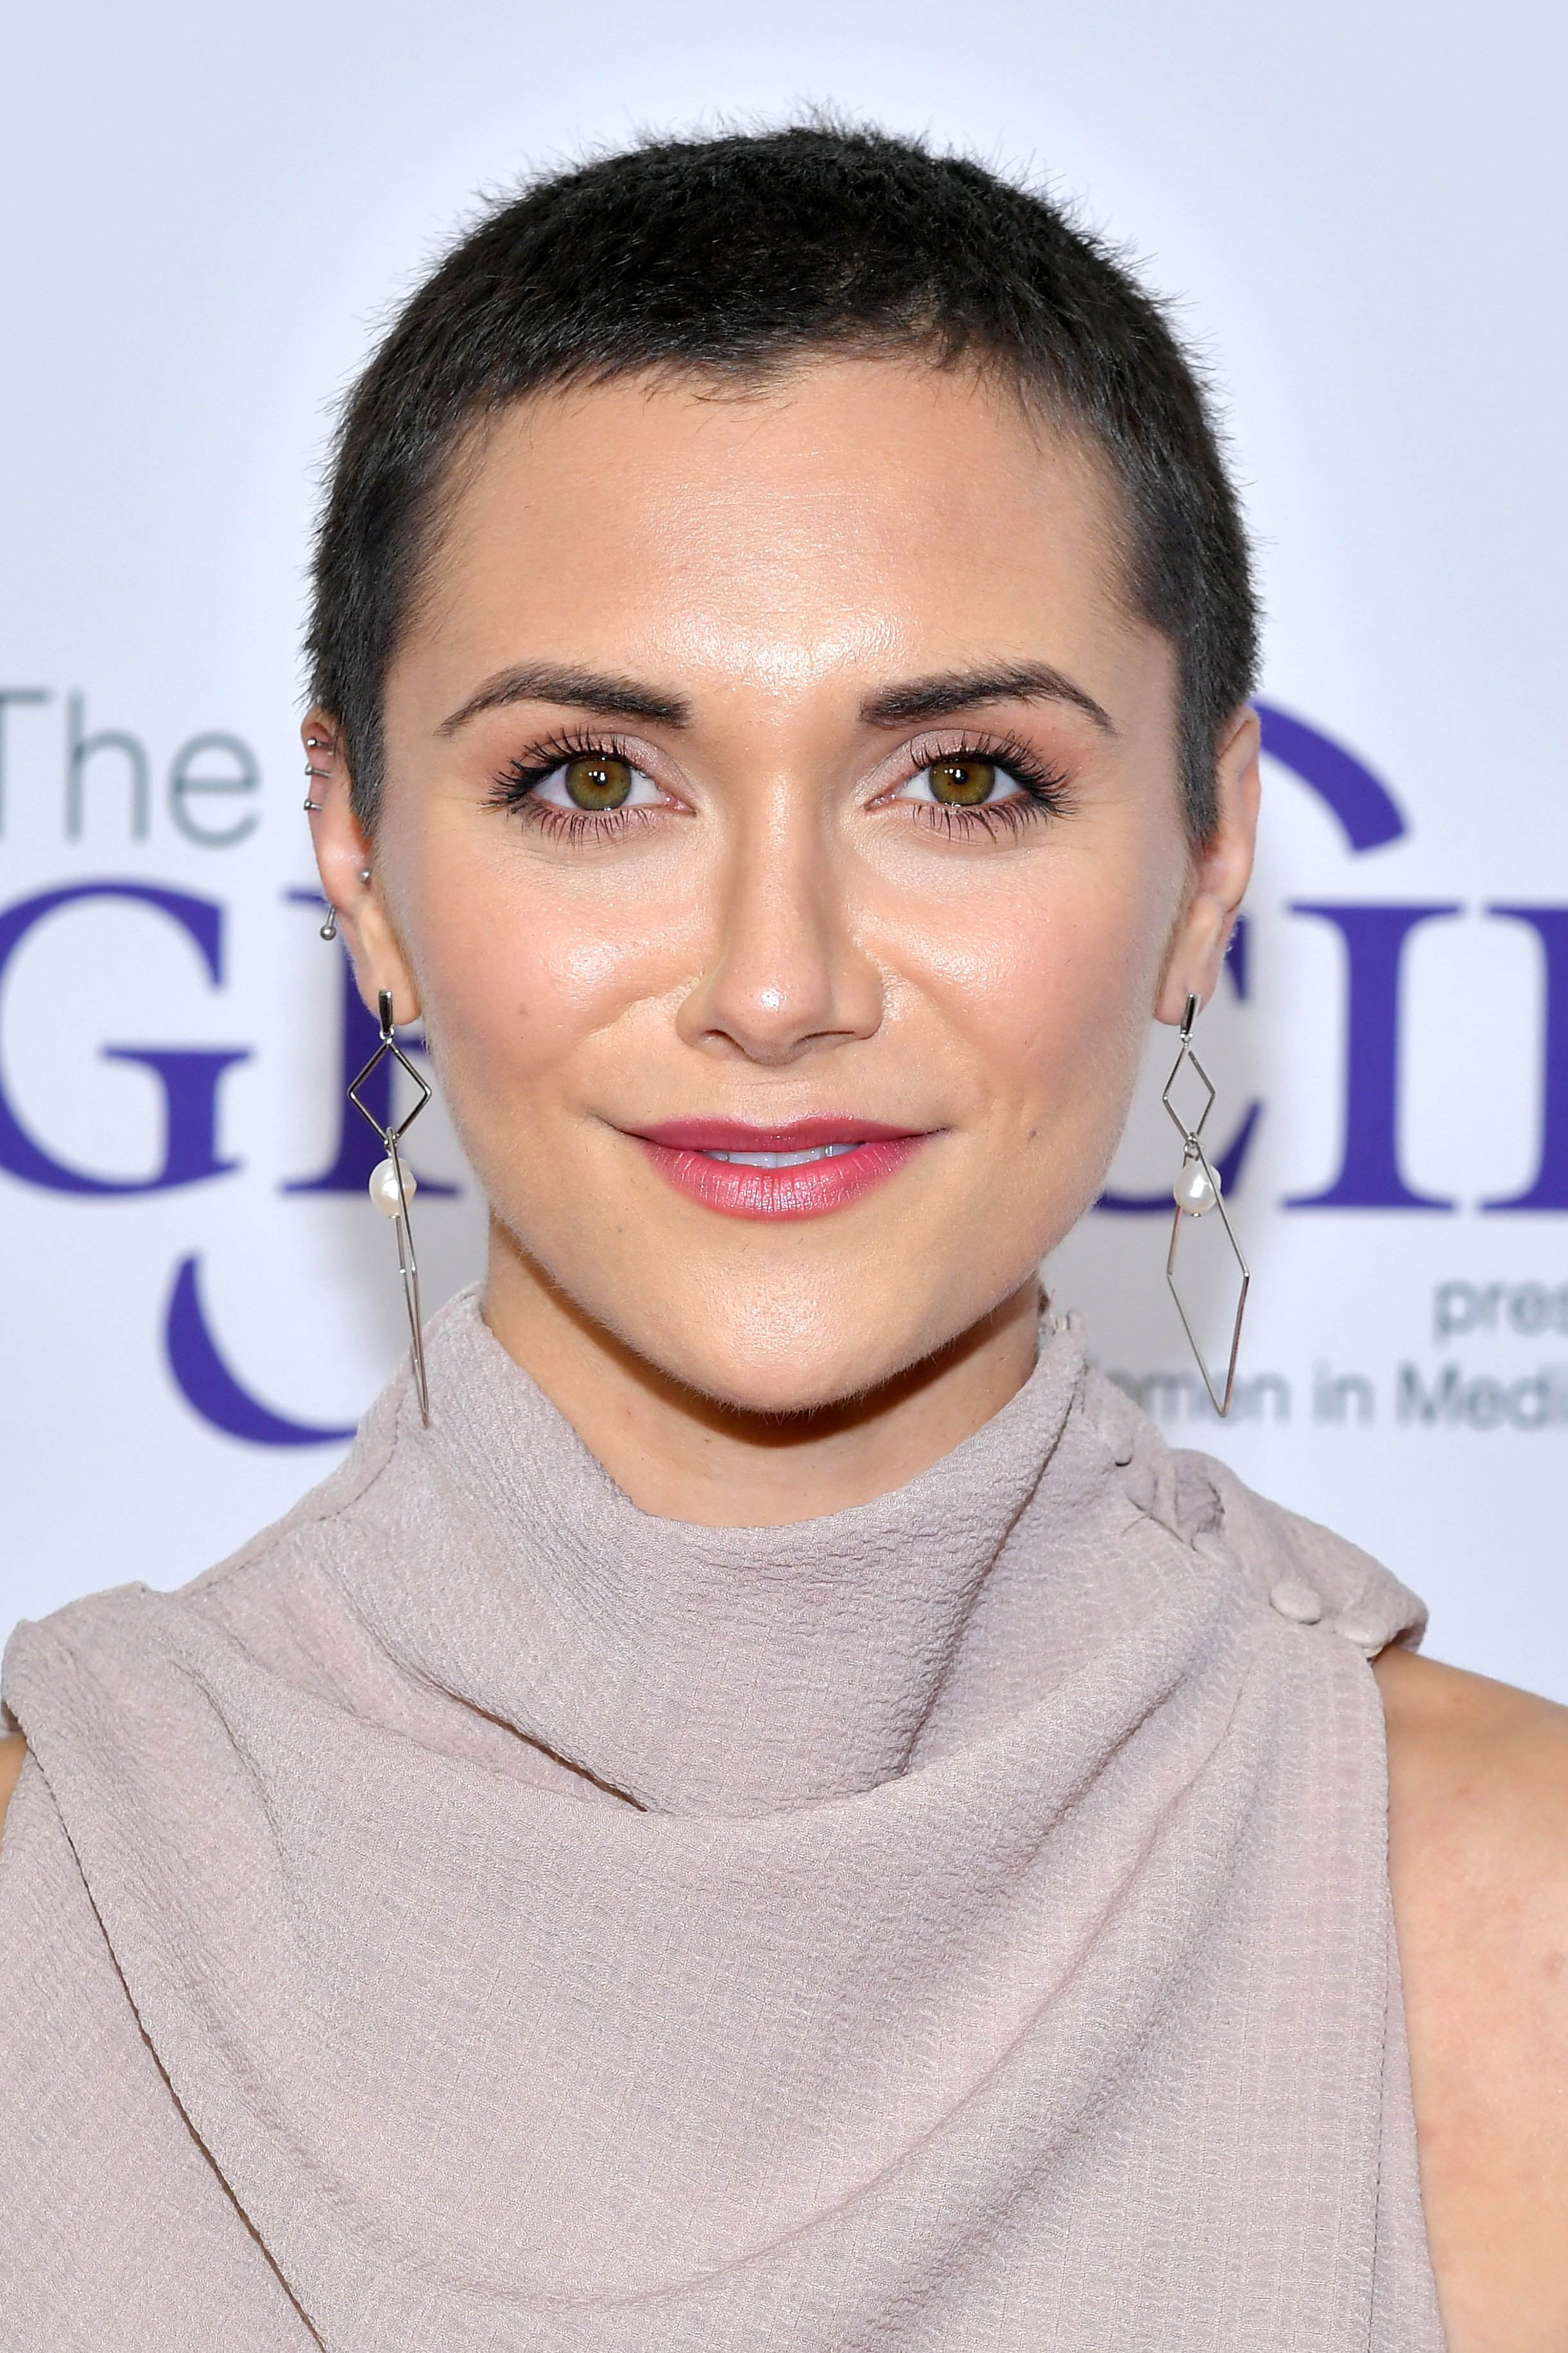 Actress Alyson Stoner attends the 44th Annual Gracies Awards at the Beverly Wilshire Four Seasons Hotel on May 21, 2019 in Beverly Hills, California | Source: Getty Images